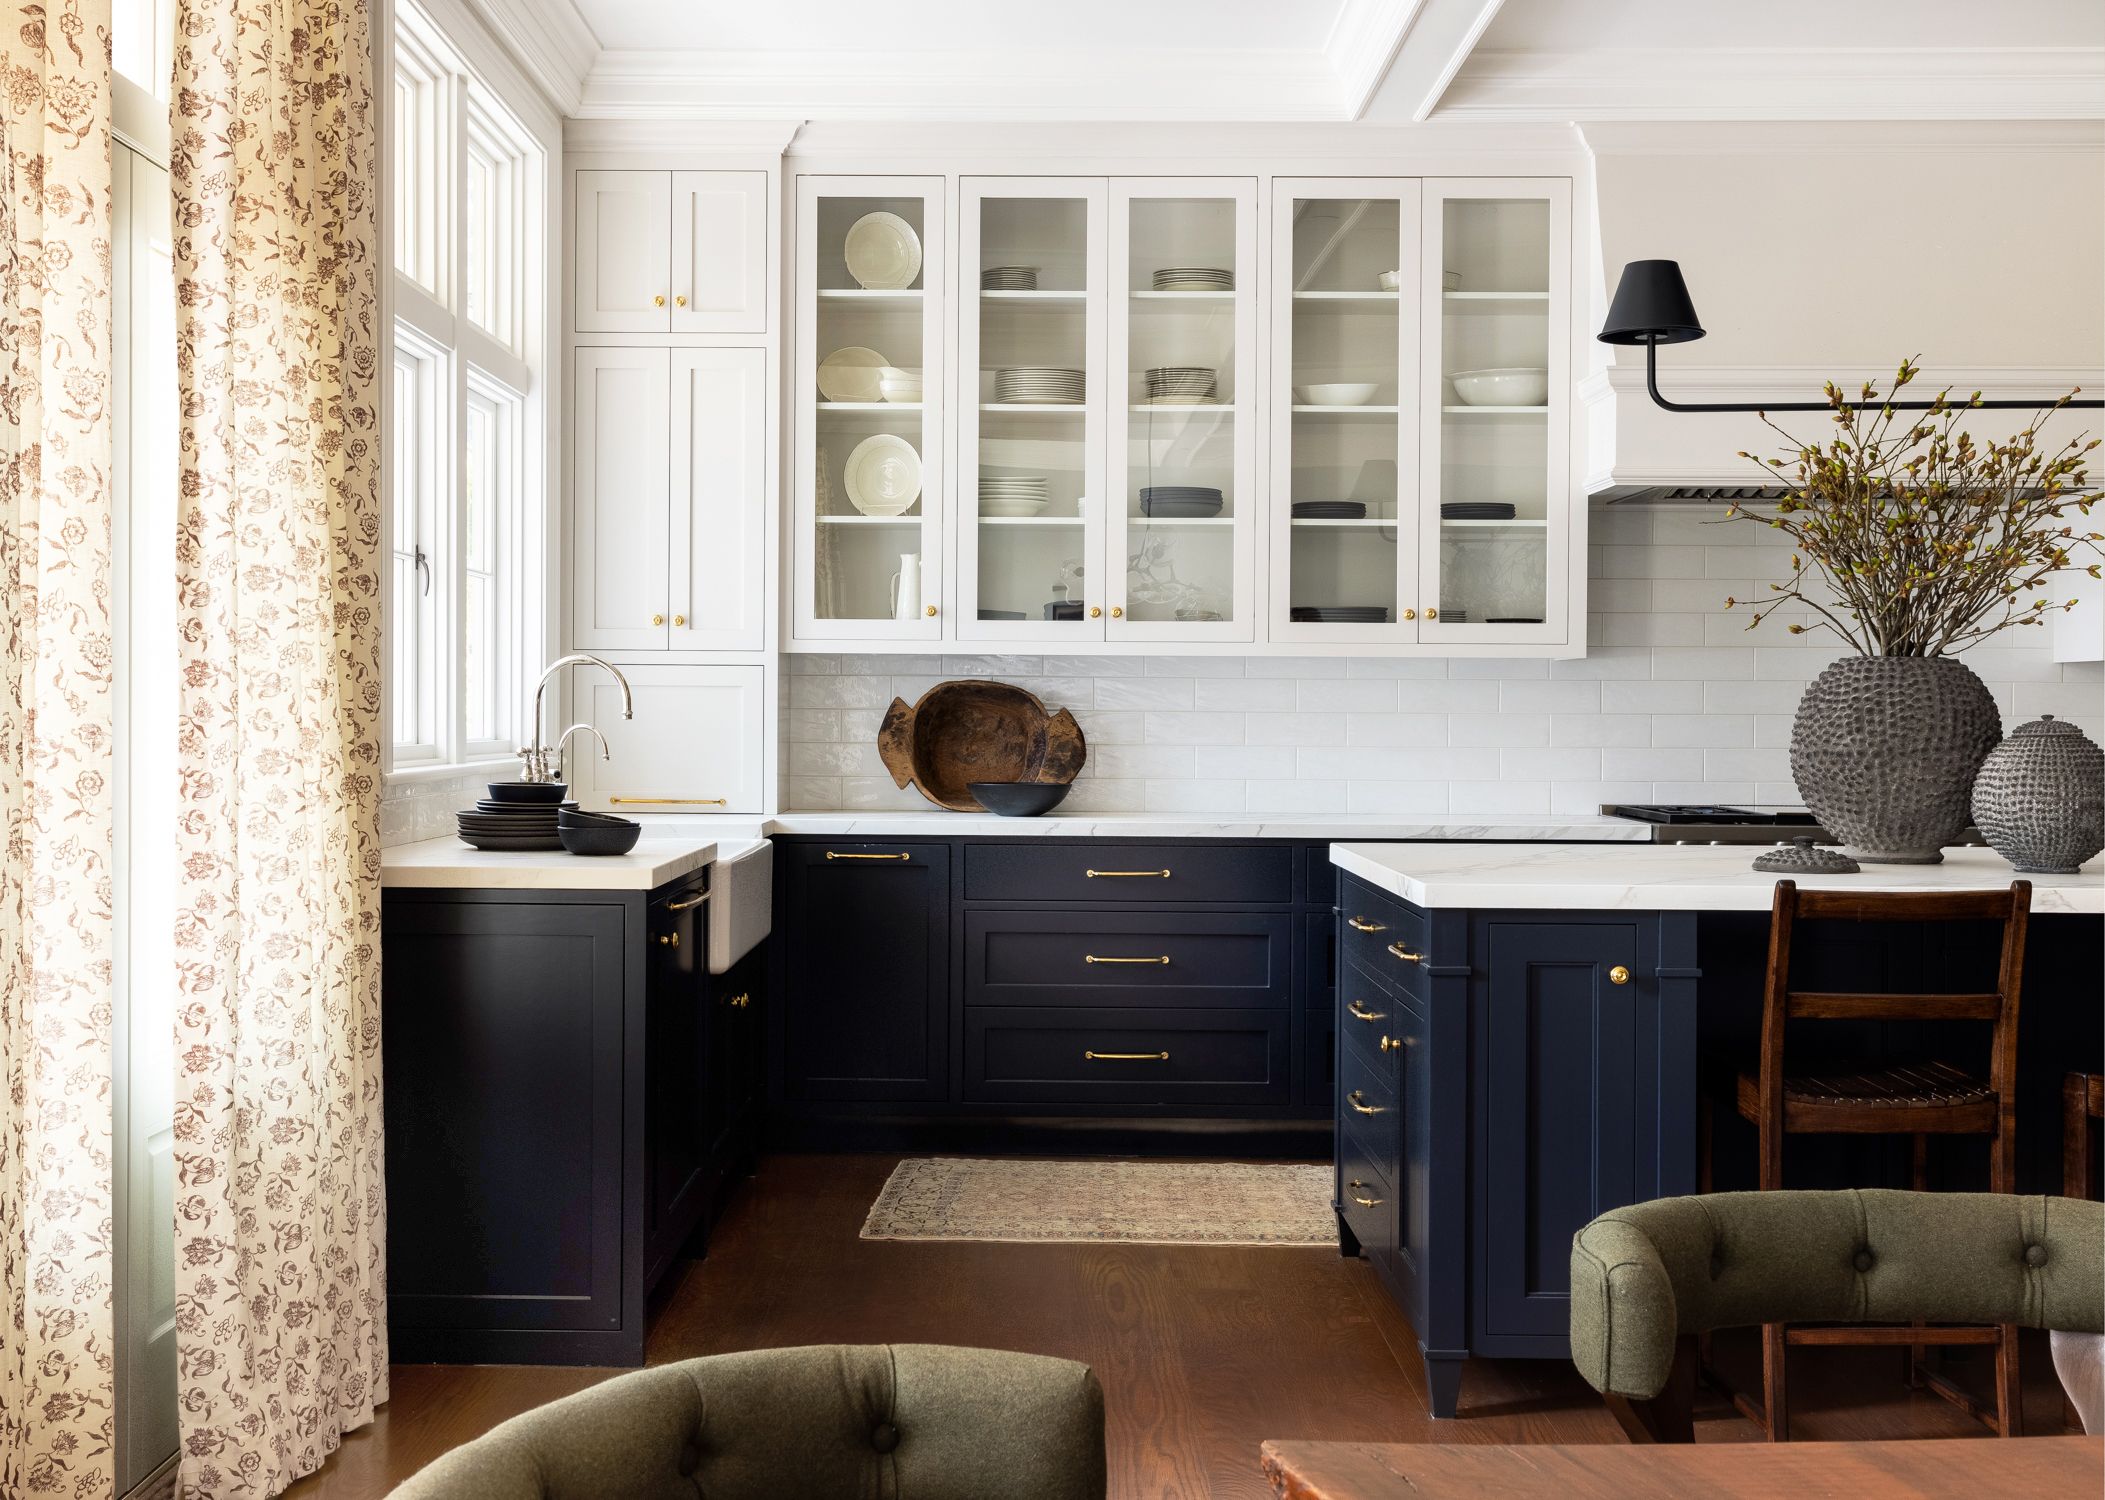 20 Examples of Two Toned Kitchen Cabinets From Designers